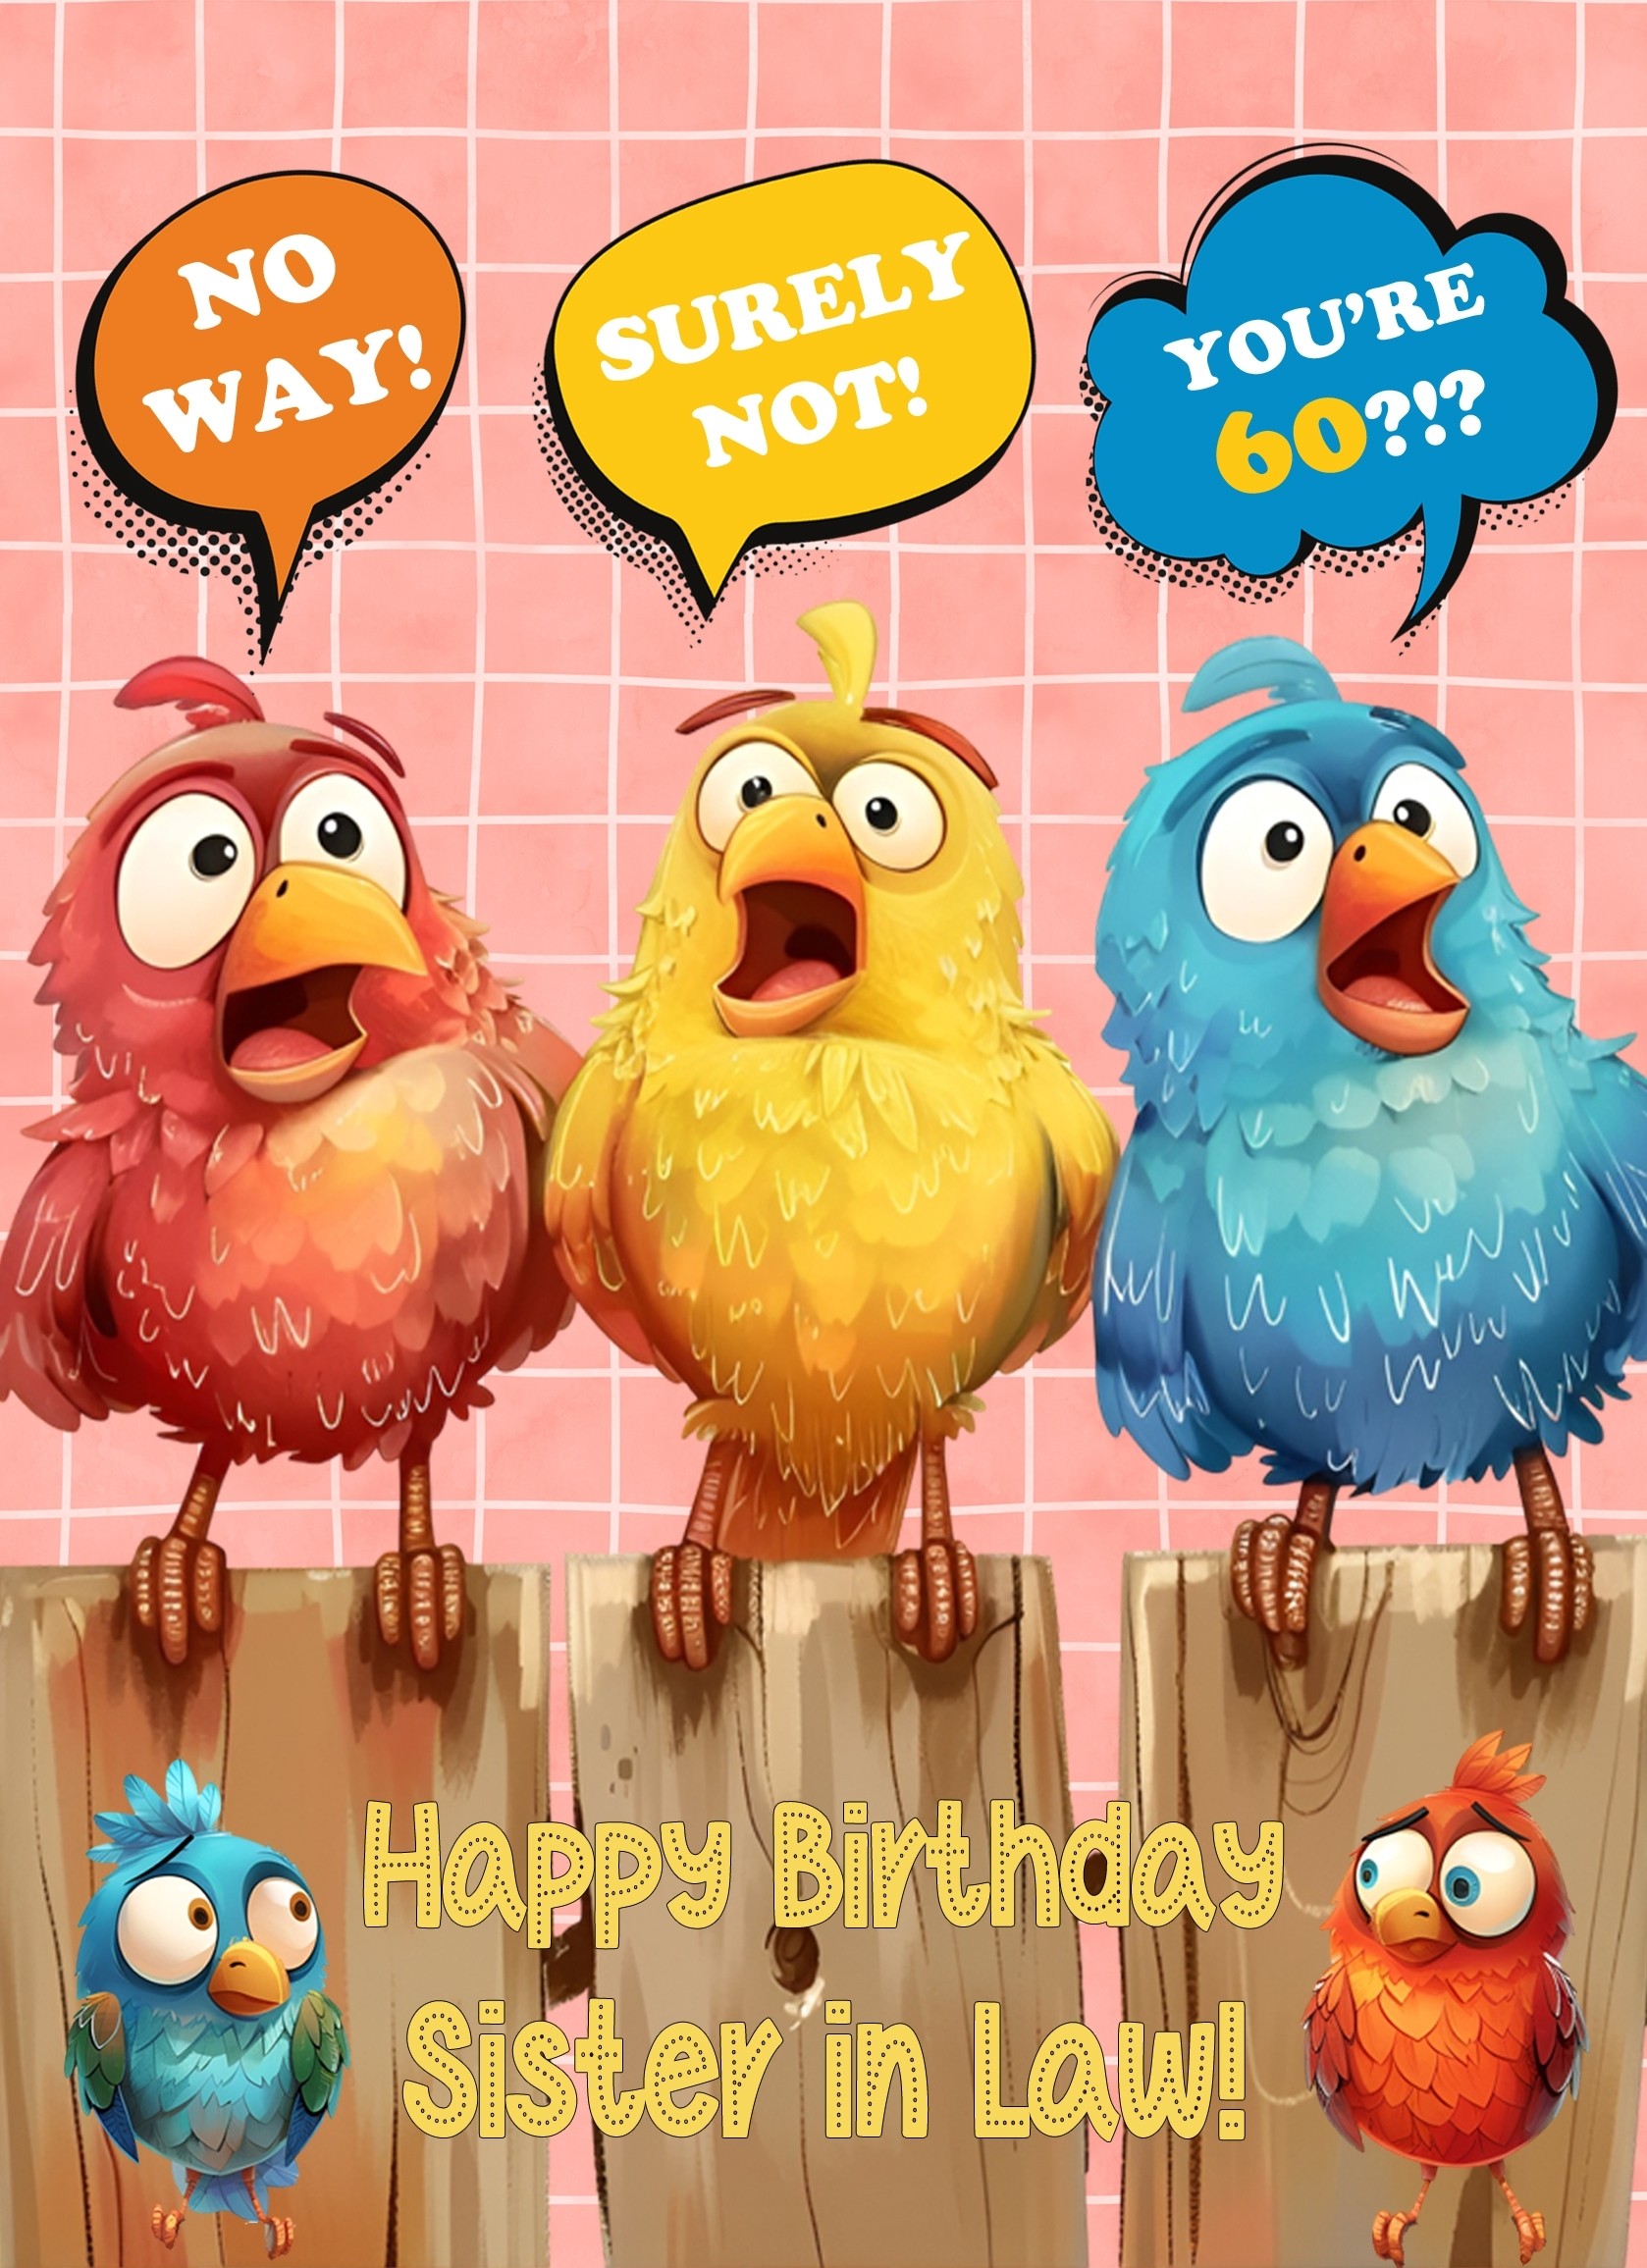 Sister in Law 60th Birthday Card (Funny Birds Surprised)